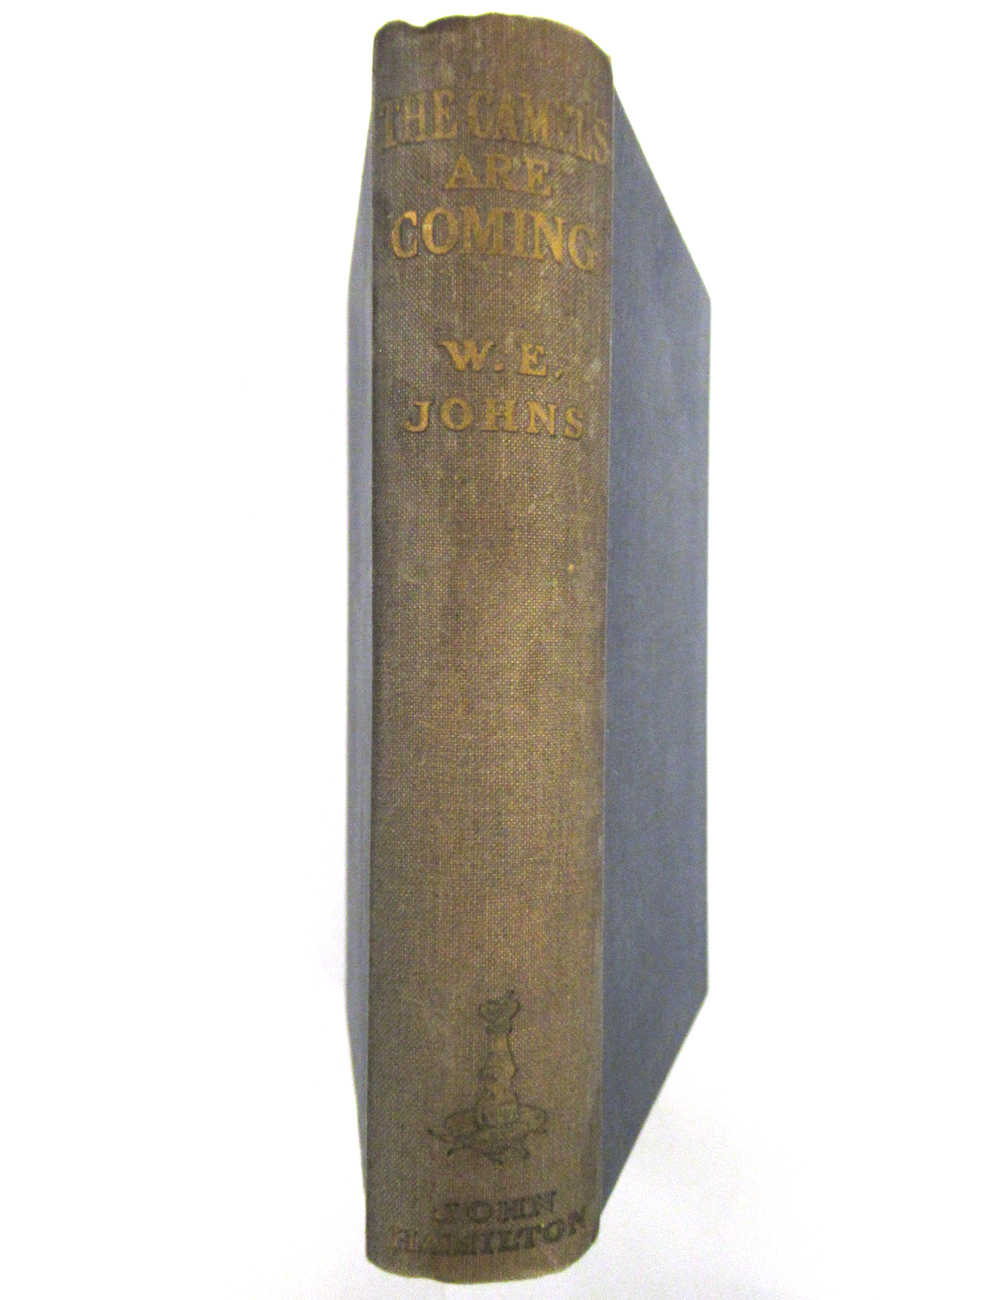 W E JOHNS (WILLIAM EARLE): THE CAMELS ARE COMING, London, John Hamilton Ltd [1933], 1st edition, 3rd - Image 4 of 5